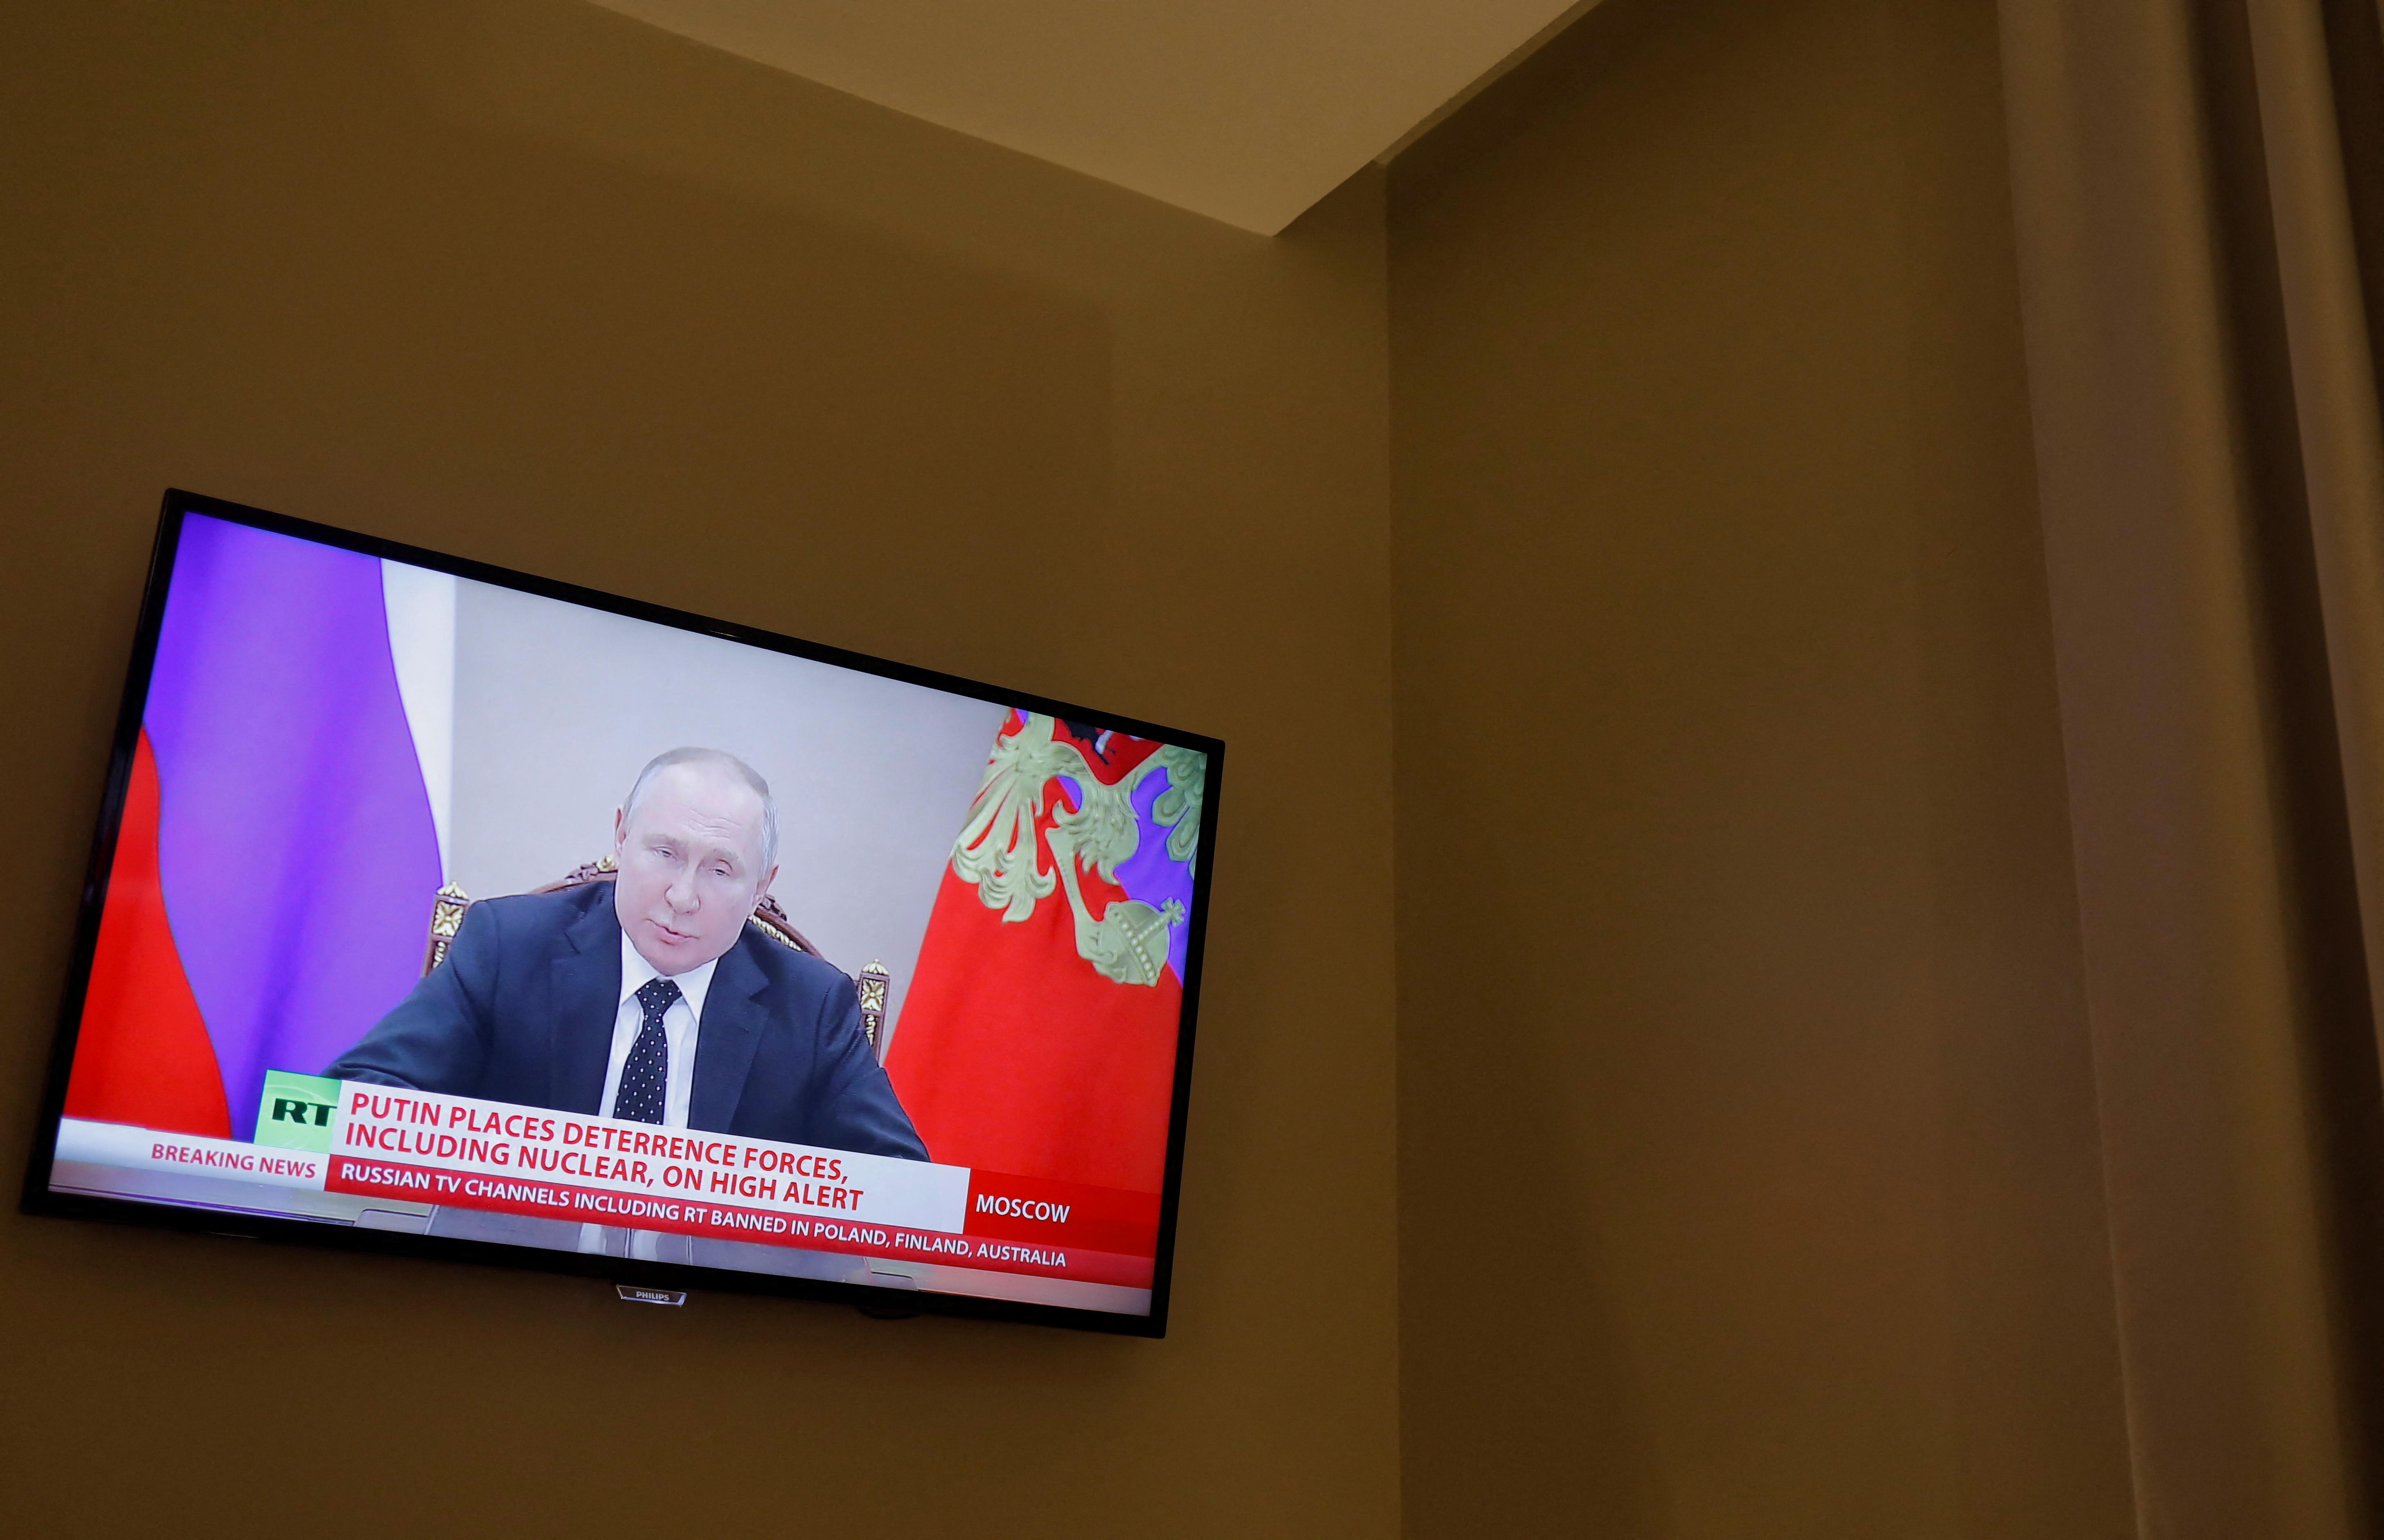 Russian President Vladimir Putin is seen on a TV screen in a hotel during a live news broadcast of the Russia Today (RT) channel TV, in Madrid